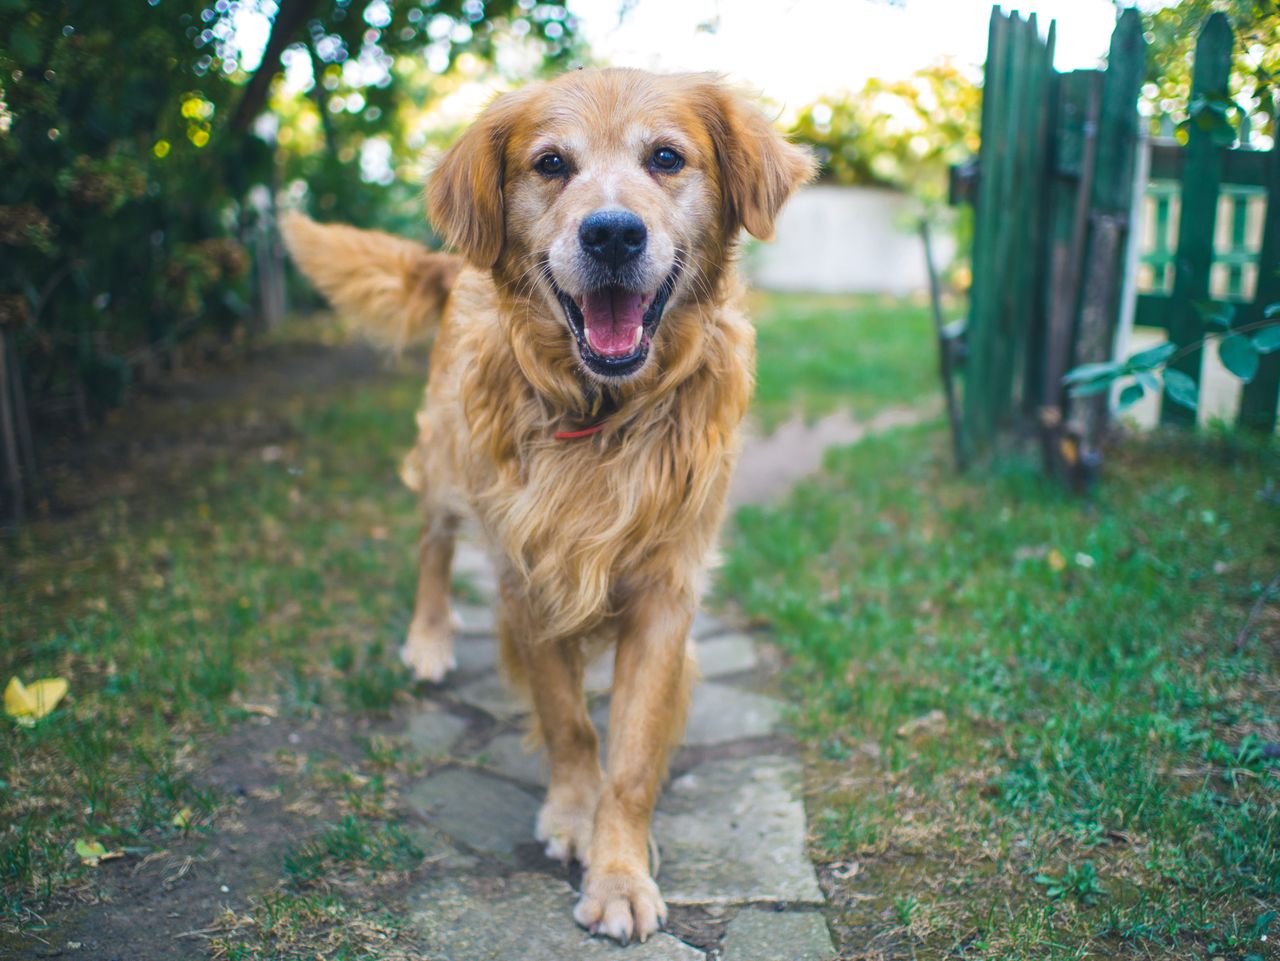 Wagging tail happiness decoded: Misunderstanding your dog's mood could bite back